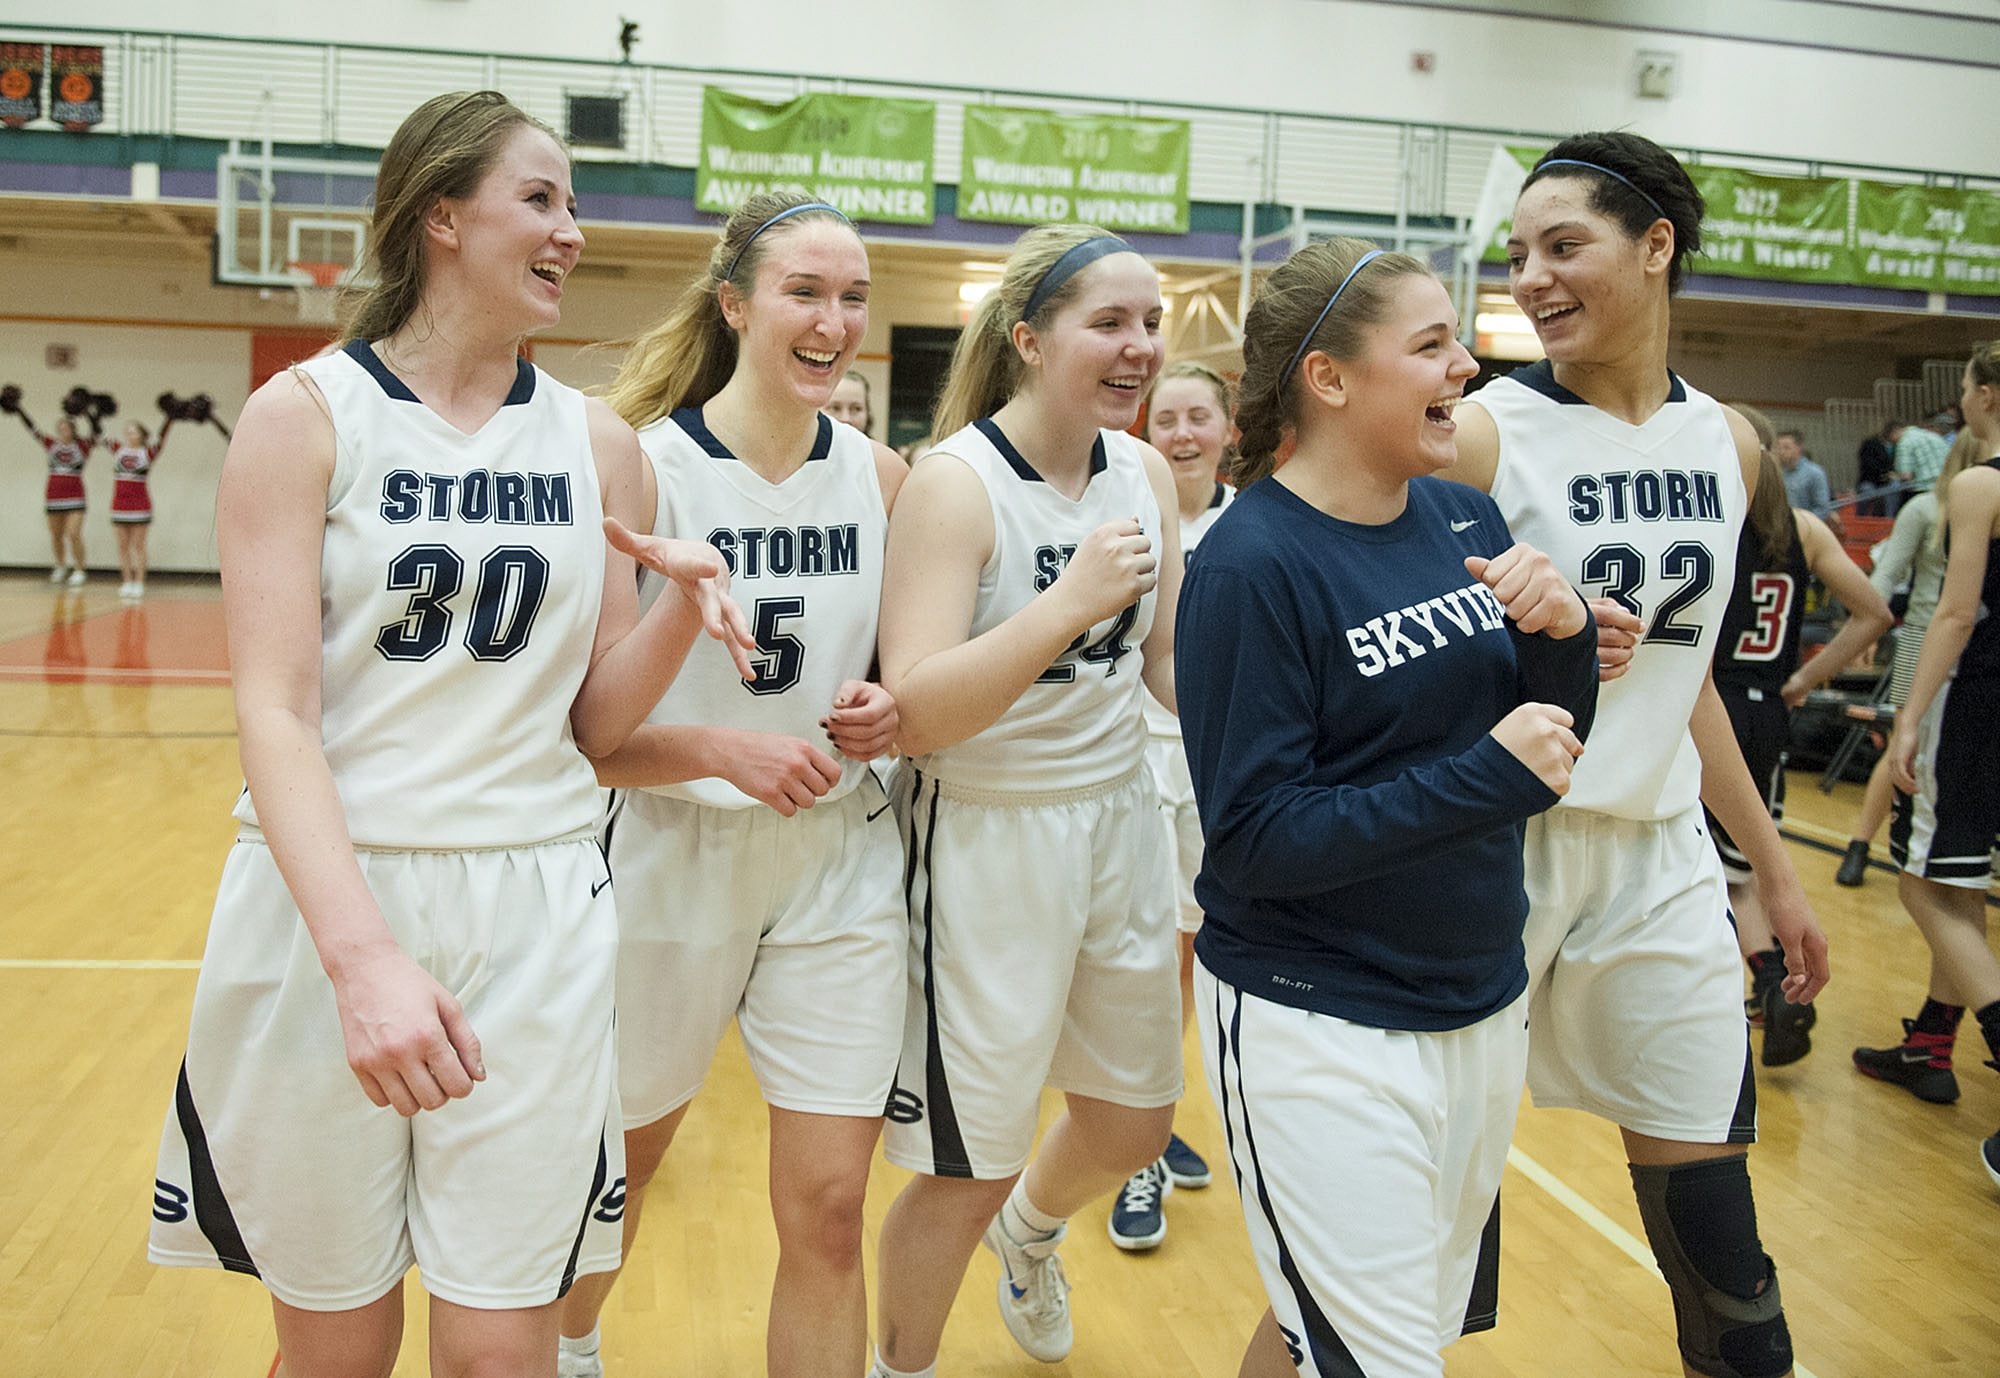 Members of the Skyview girls basketball team celebrate after their win over Camas Tuesday evening, Feb. 16, 2016 at Battle Ground High School.